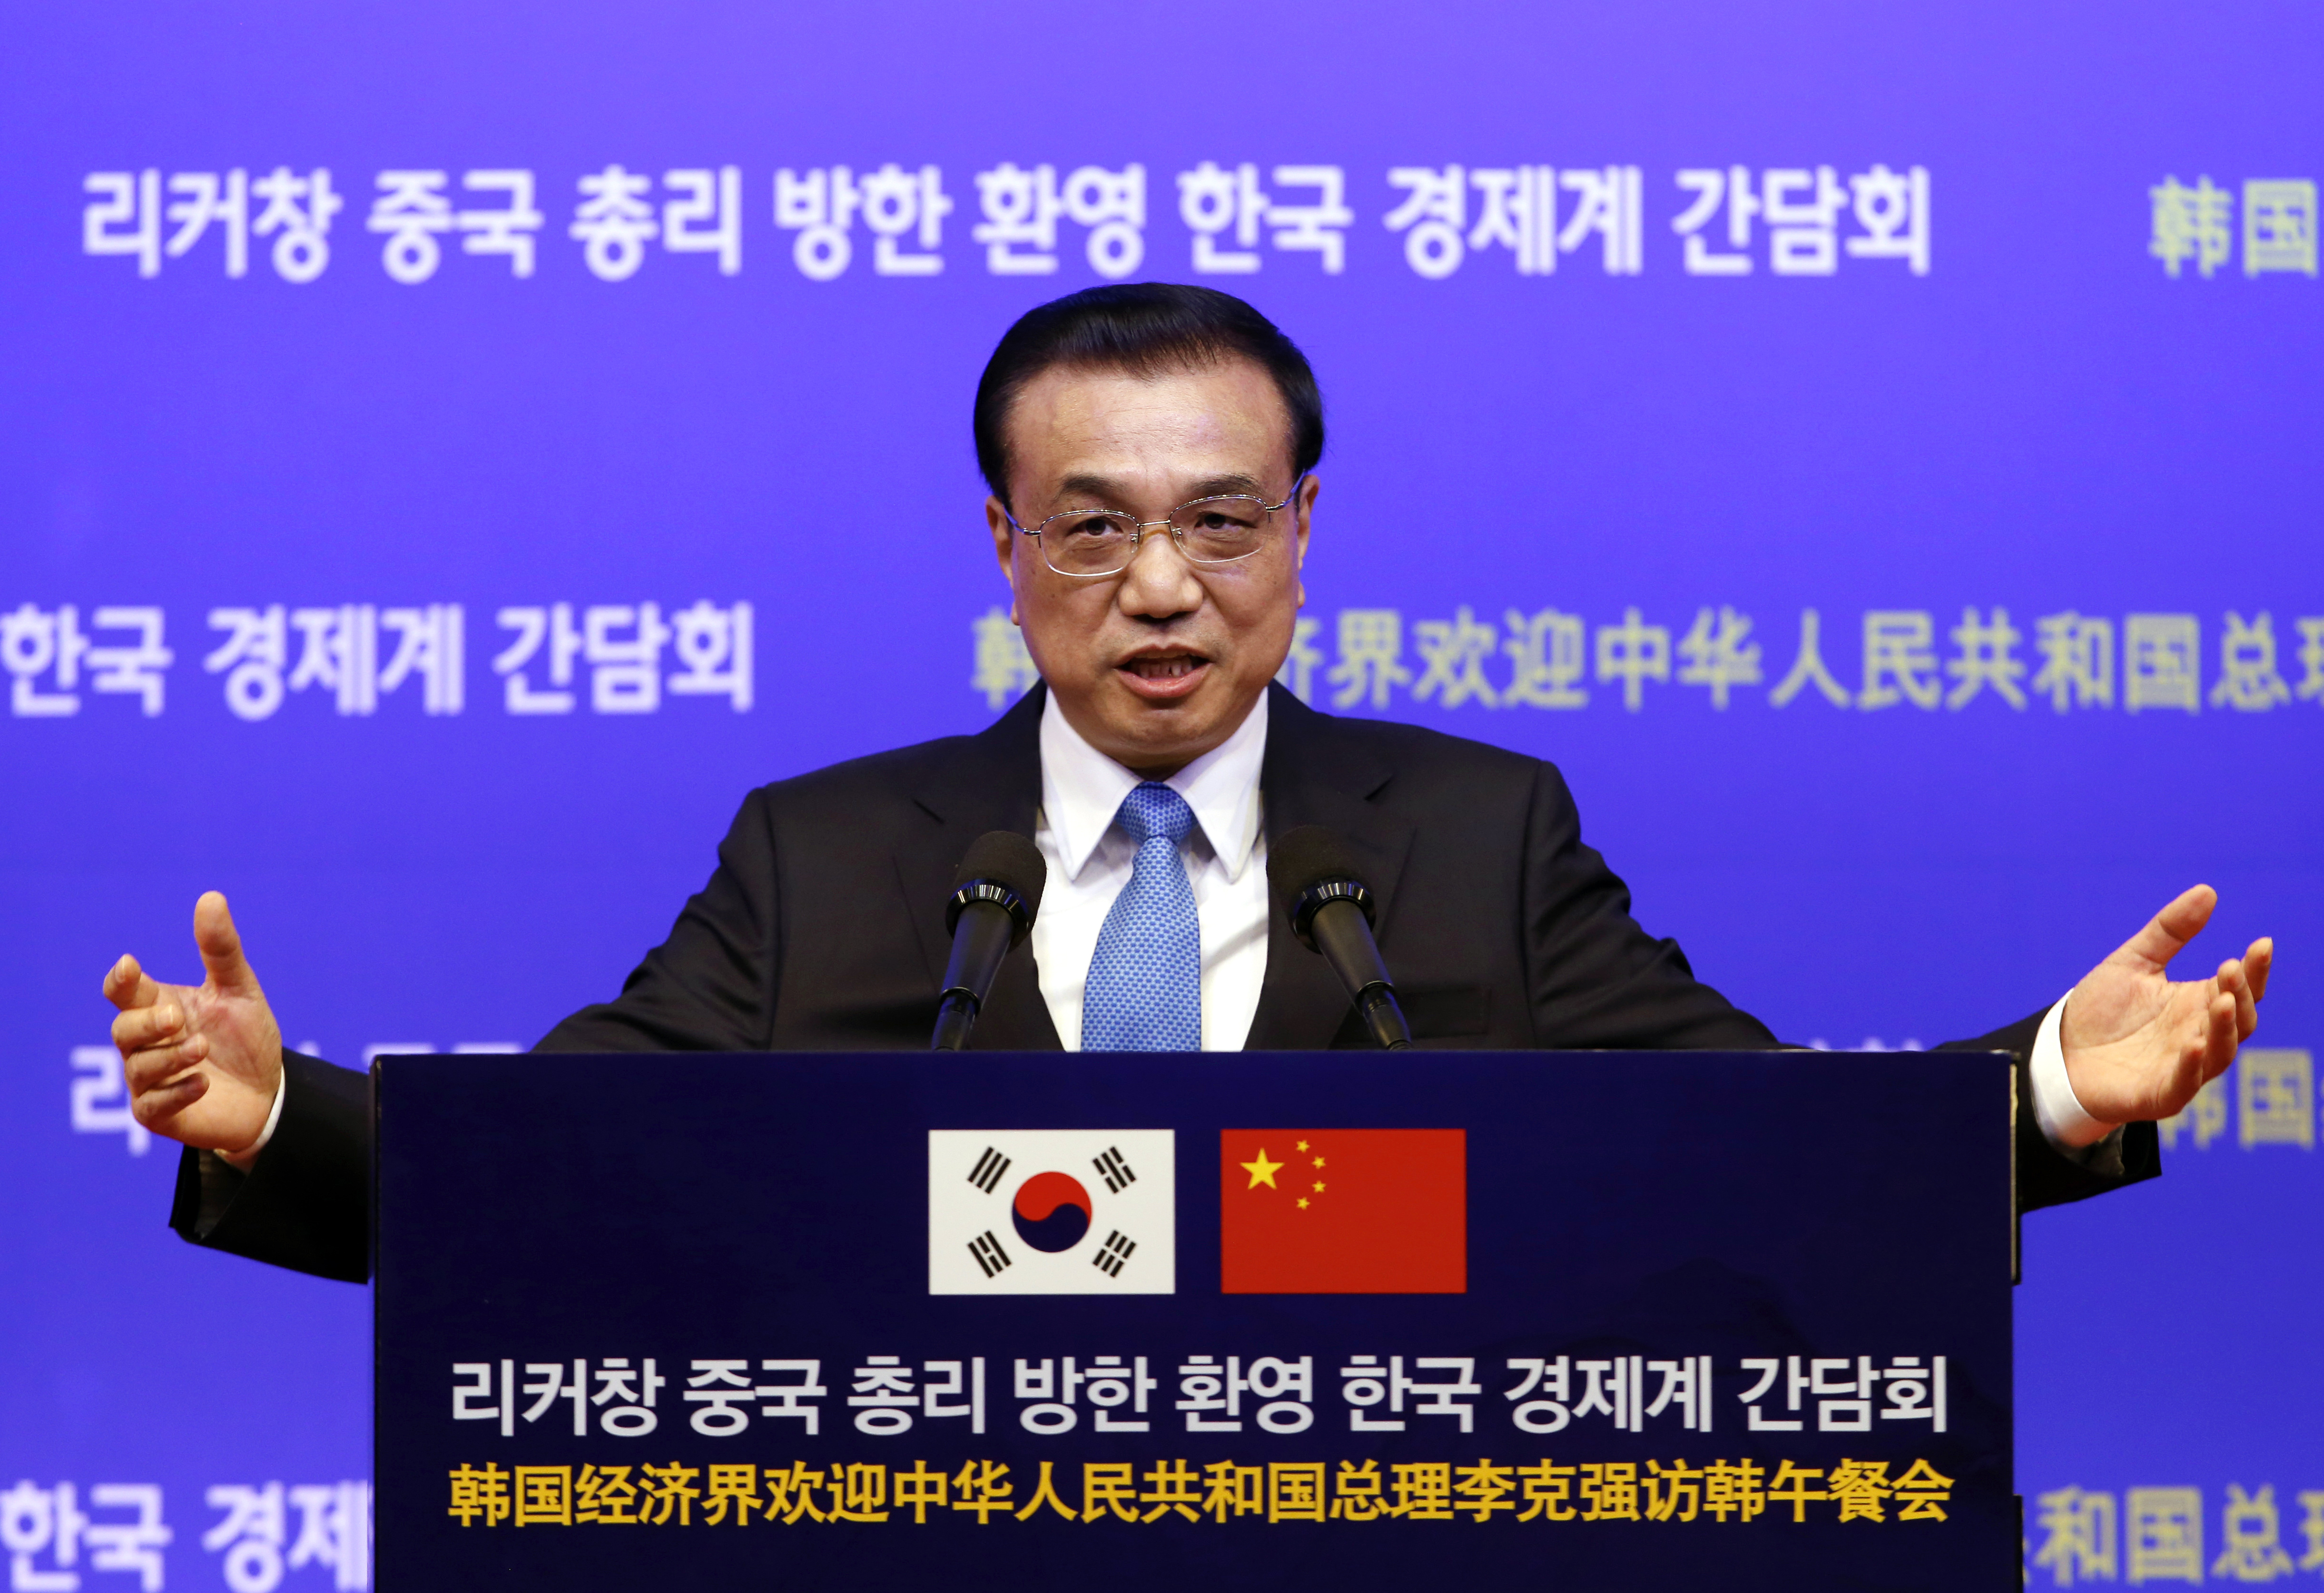 Chinese Premier Li Keqiang delivers a speech during a meeting with business leaders in Seoul, South Korea on Sunday. Photo: AP